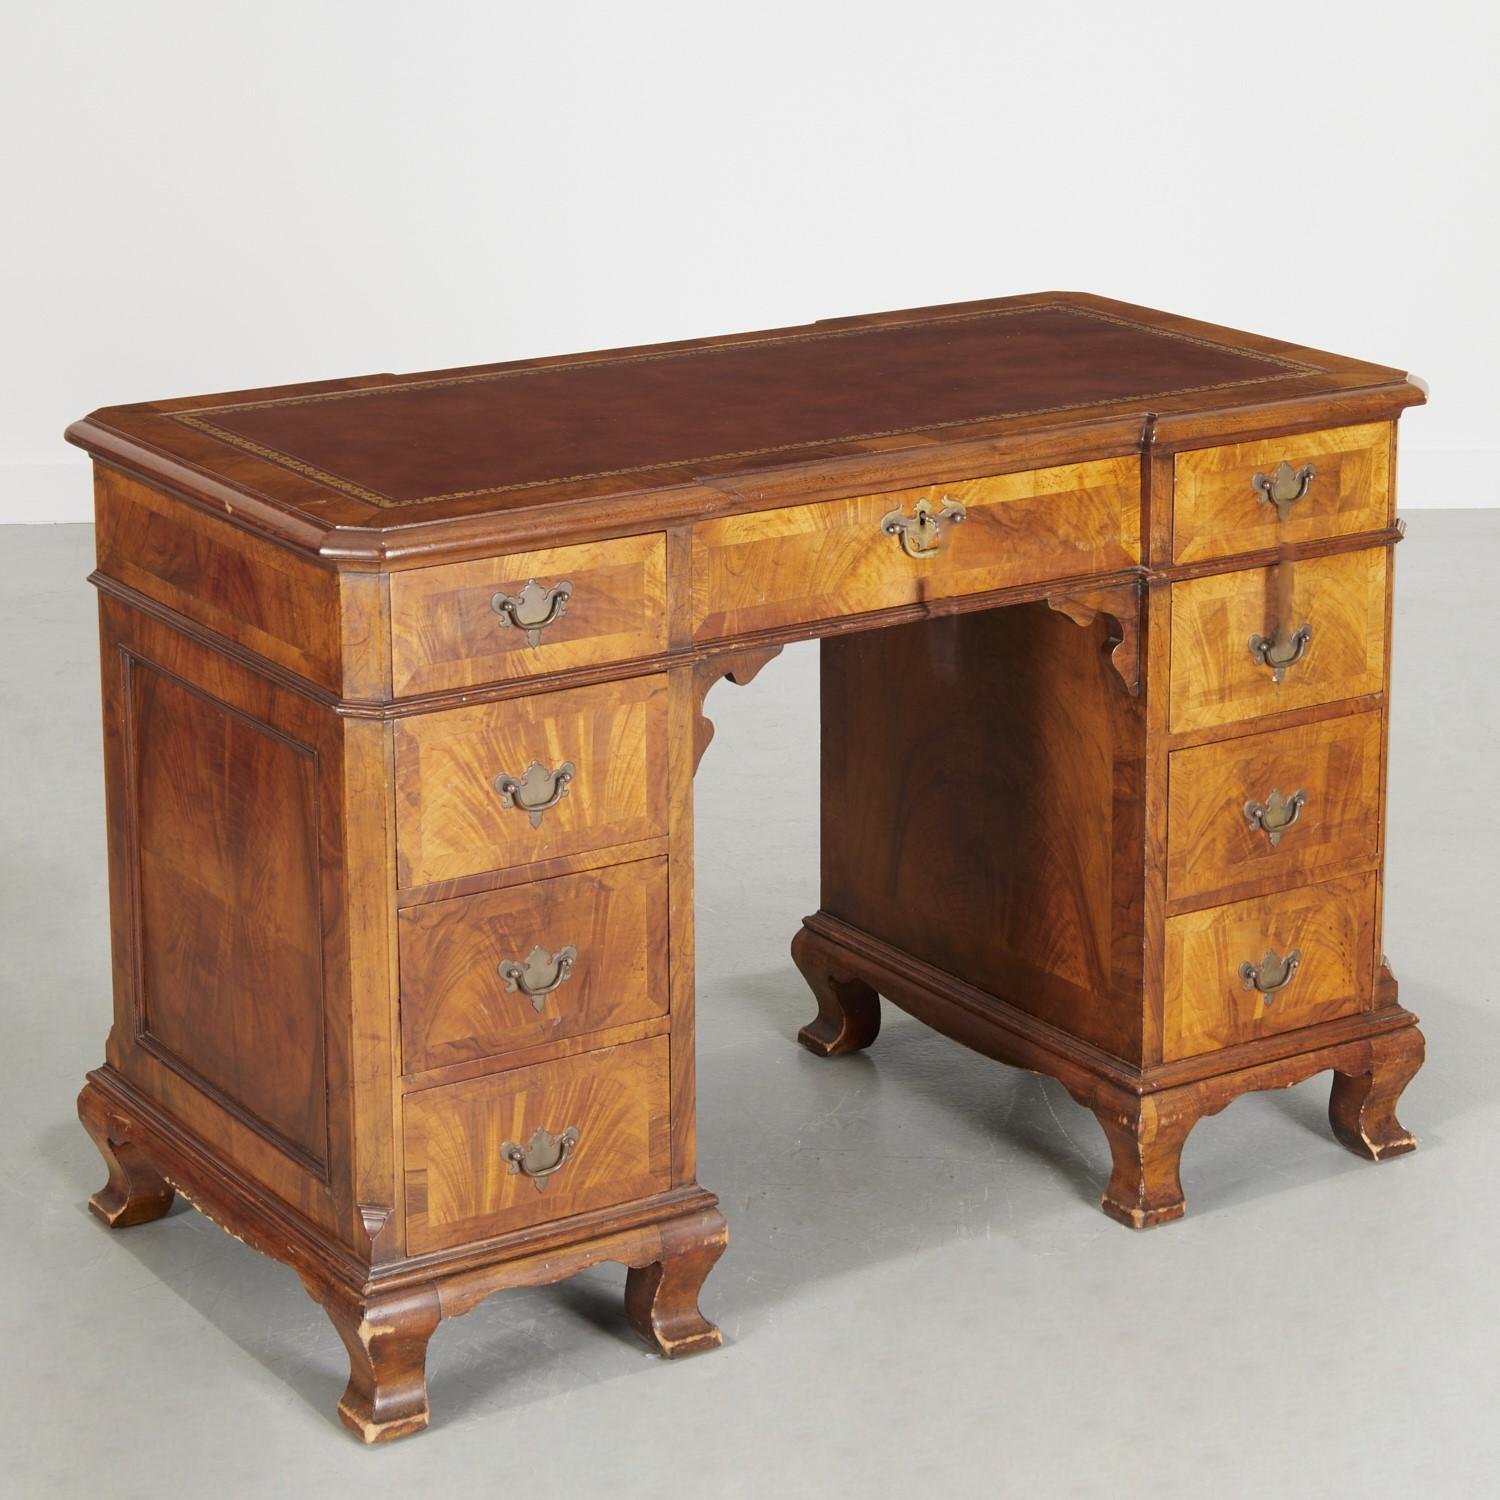 20th Century George III Style Figured Mahogany Desk with Embossed Leather Top For Sale 3